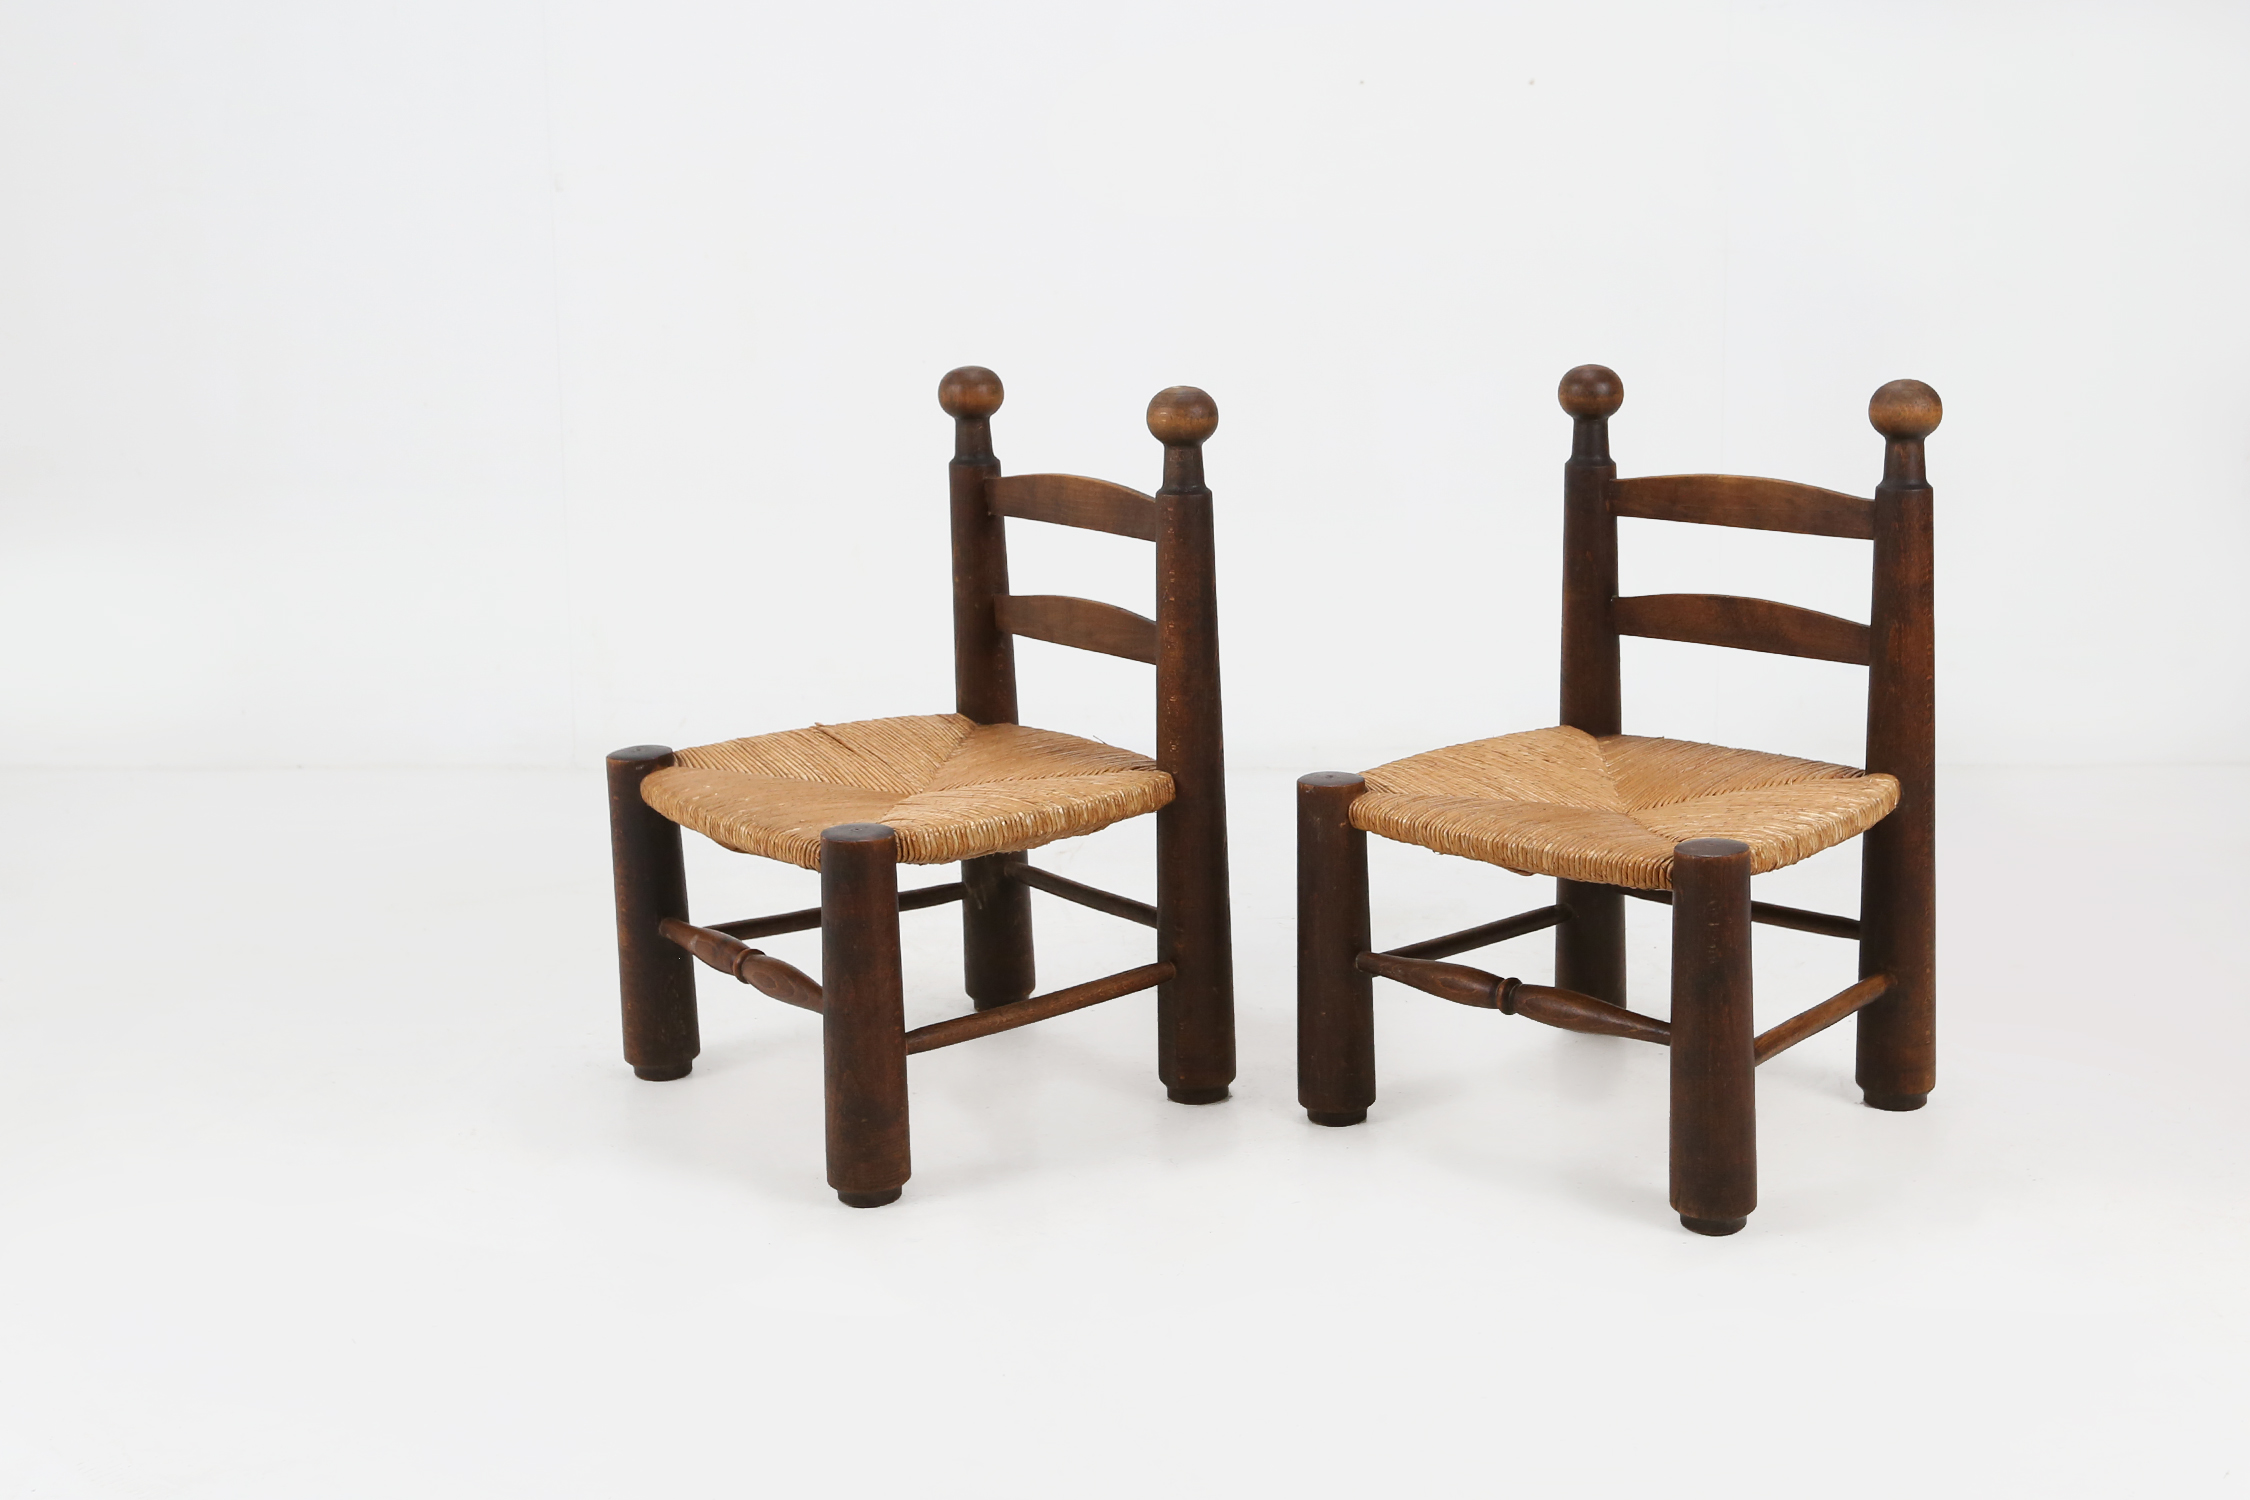 Small wooden and wicker chairs by Charles Dudouytthumbnail